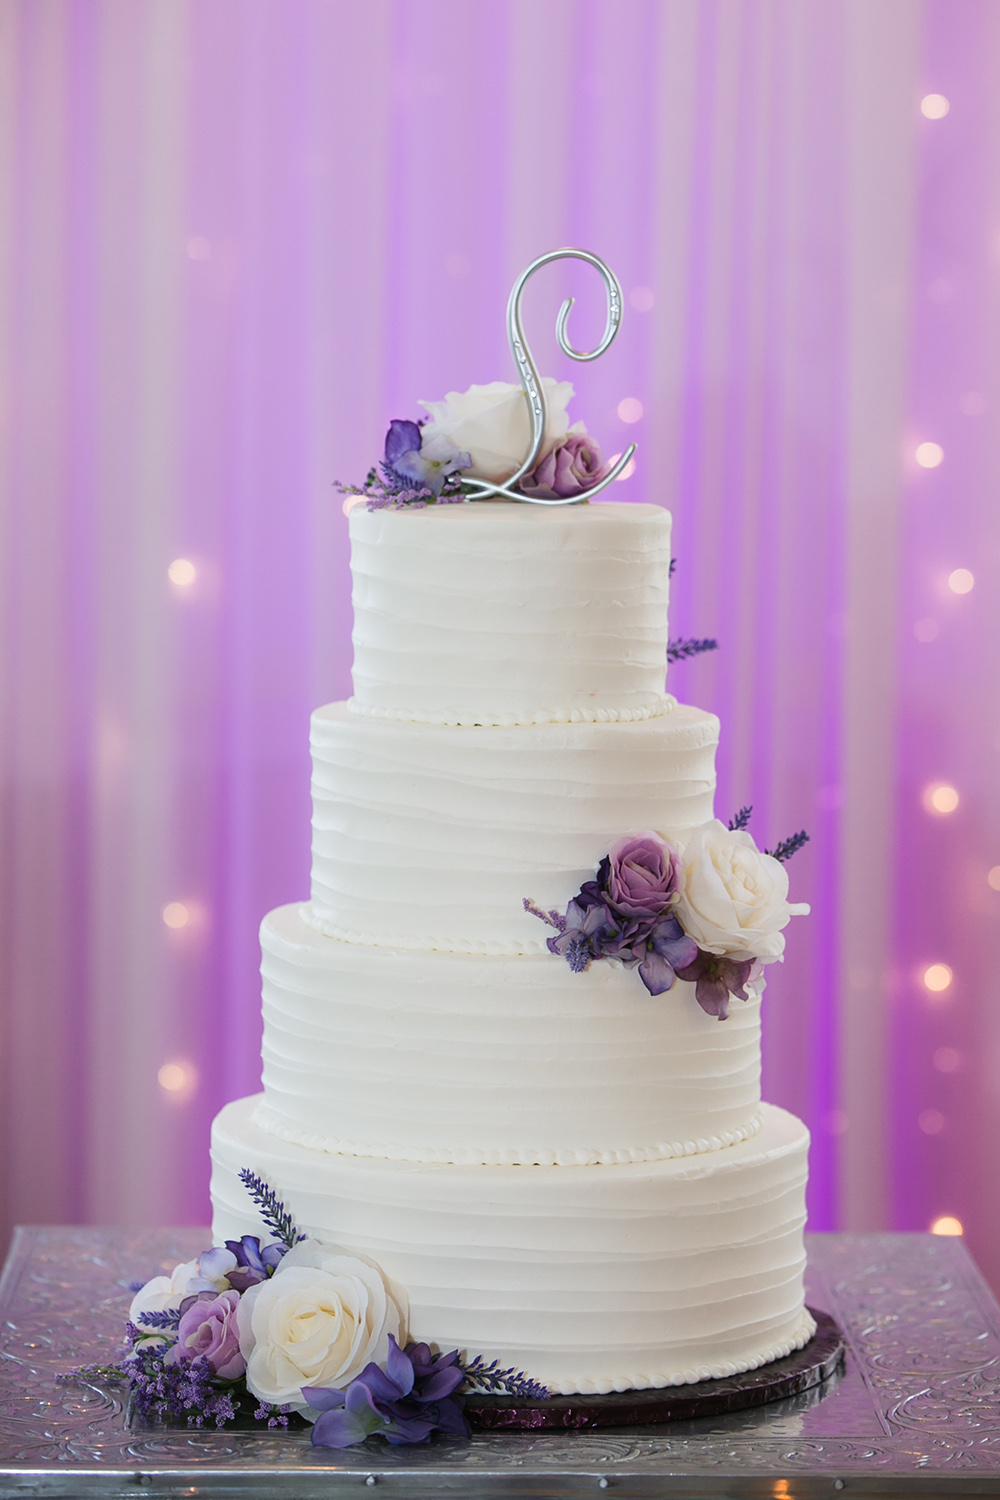 cake with uplighting behind it